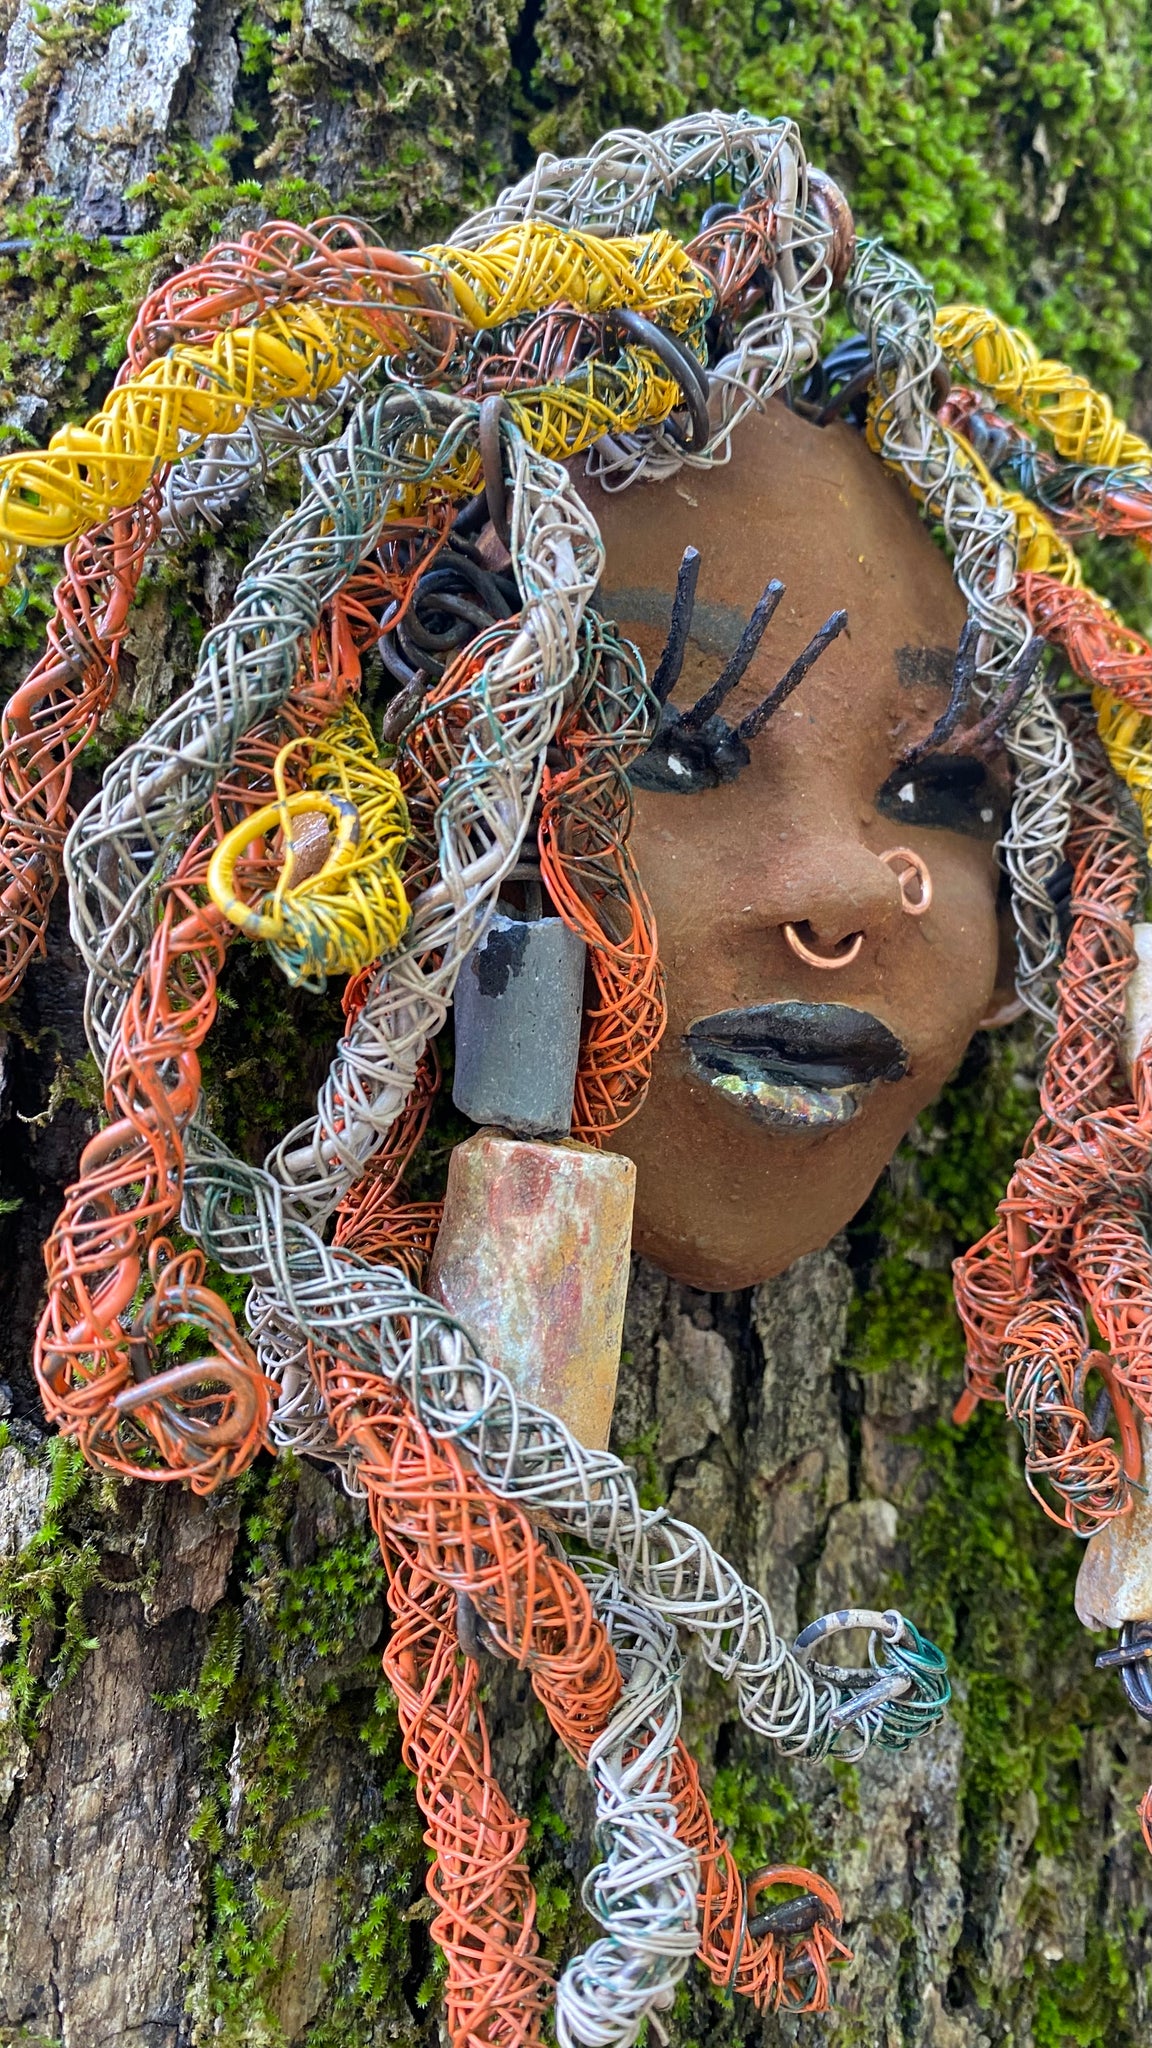 Introducing Nala, the 5" x 7" whimsical mask with a cocoa copper complexion. Its handmade textured dreadlocks and coiled 16 gauge wire provide a unique look that's not found in typical masks. Nala is the perfect conversationalist for your wild inquiries, so don't hesitate - give her a shout! My art journey began after I visited the Smithsonian Museum of African Art, and I was inspired to create Nala.